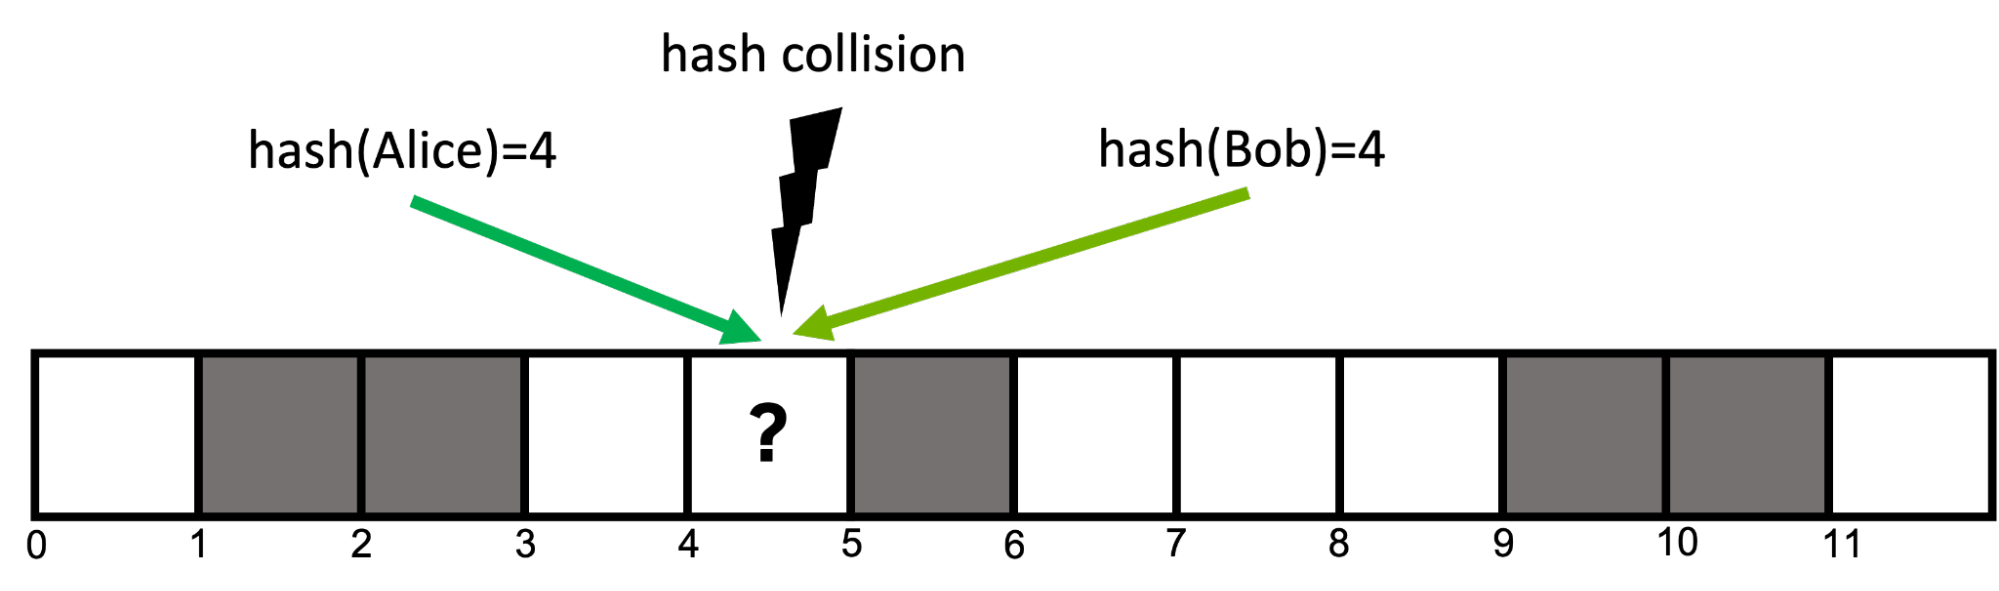 Diagram showing a hash collision in bucket four. Gray colored slots denote already occupied slots.
